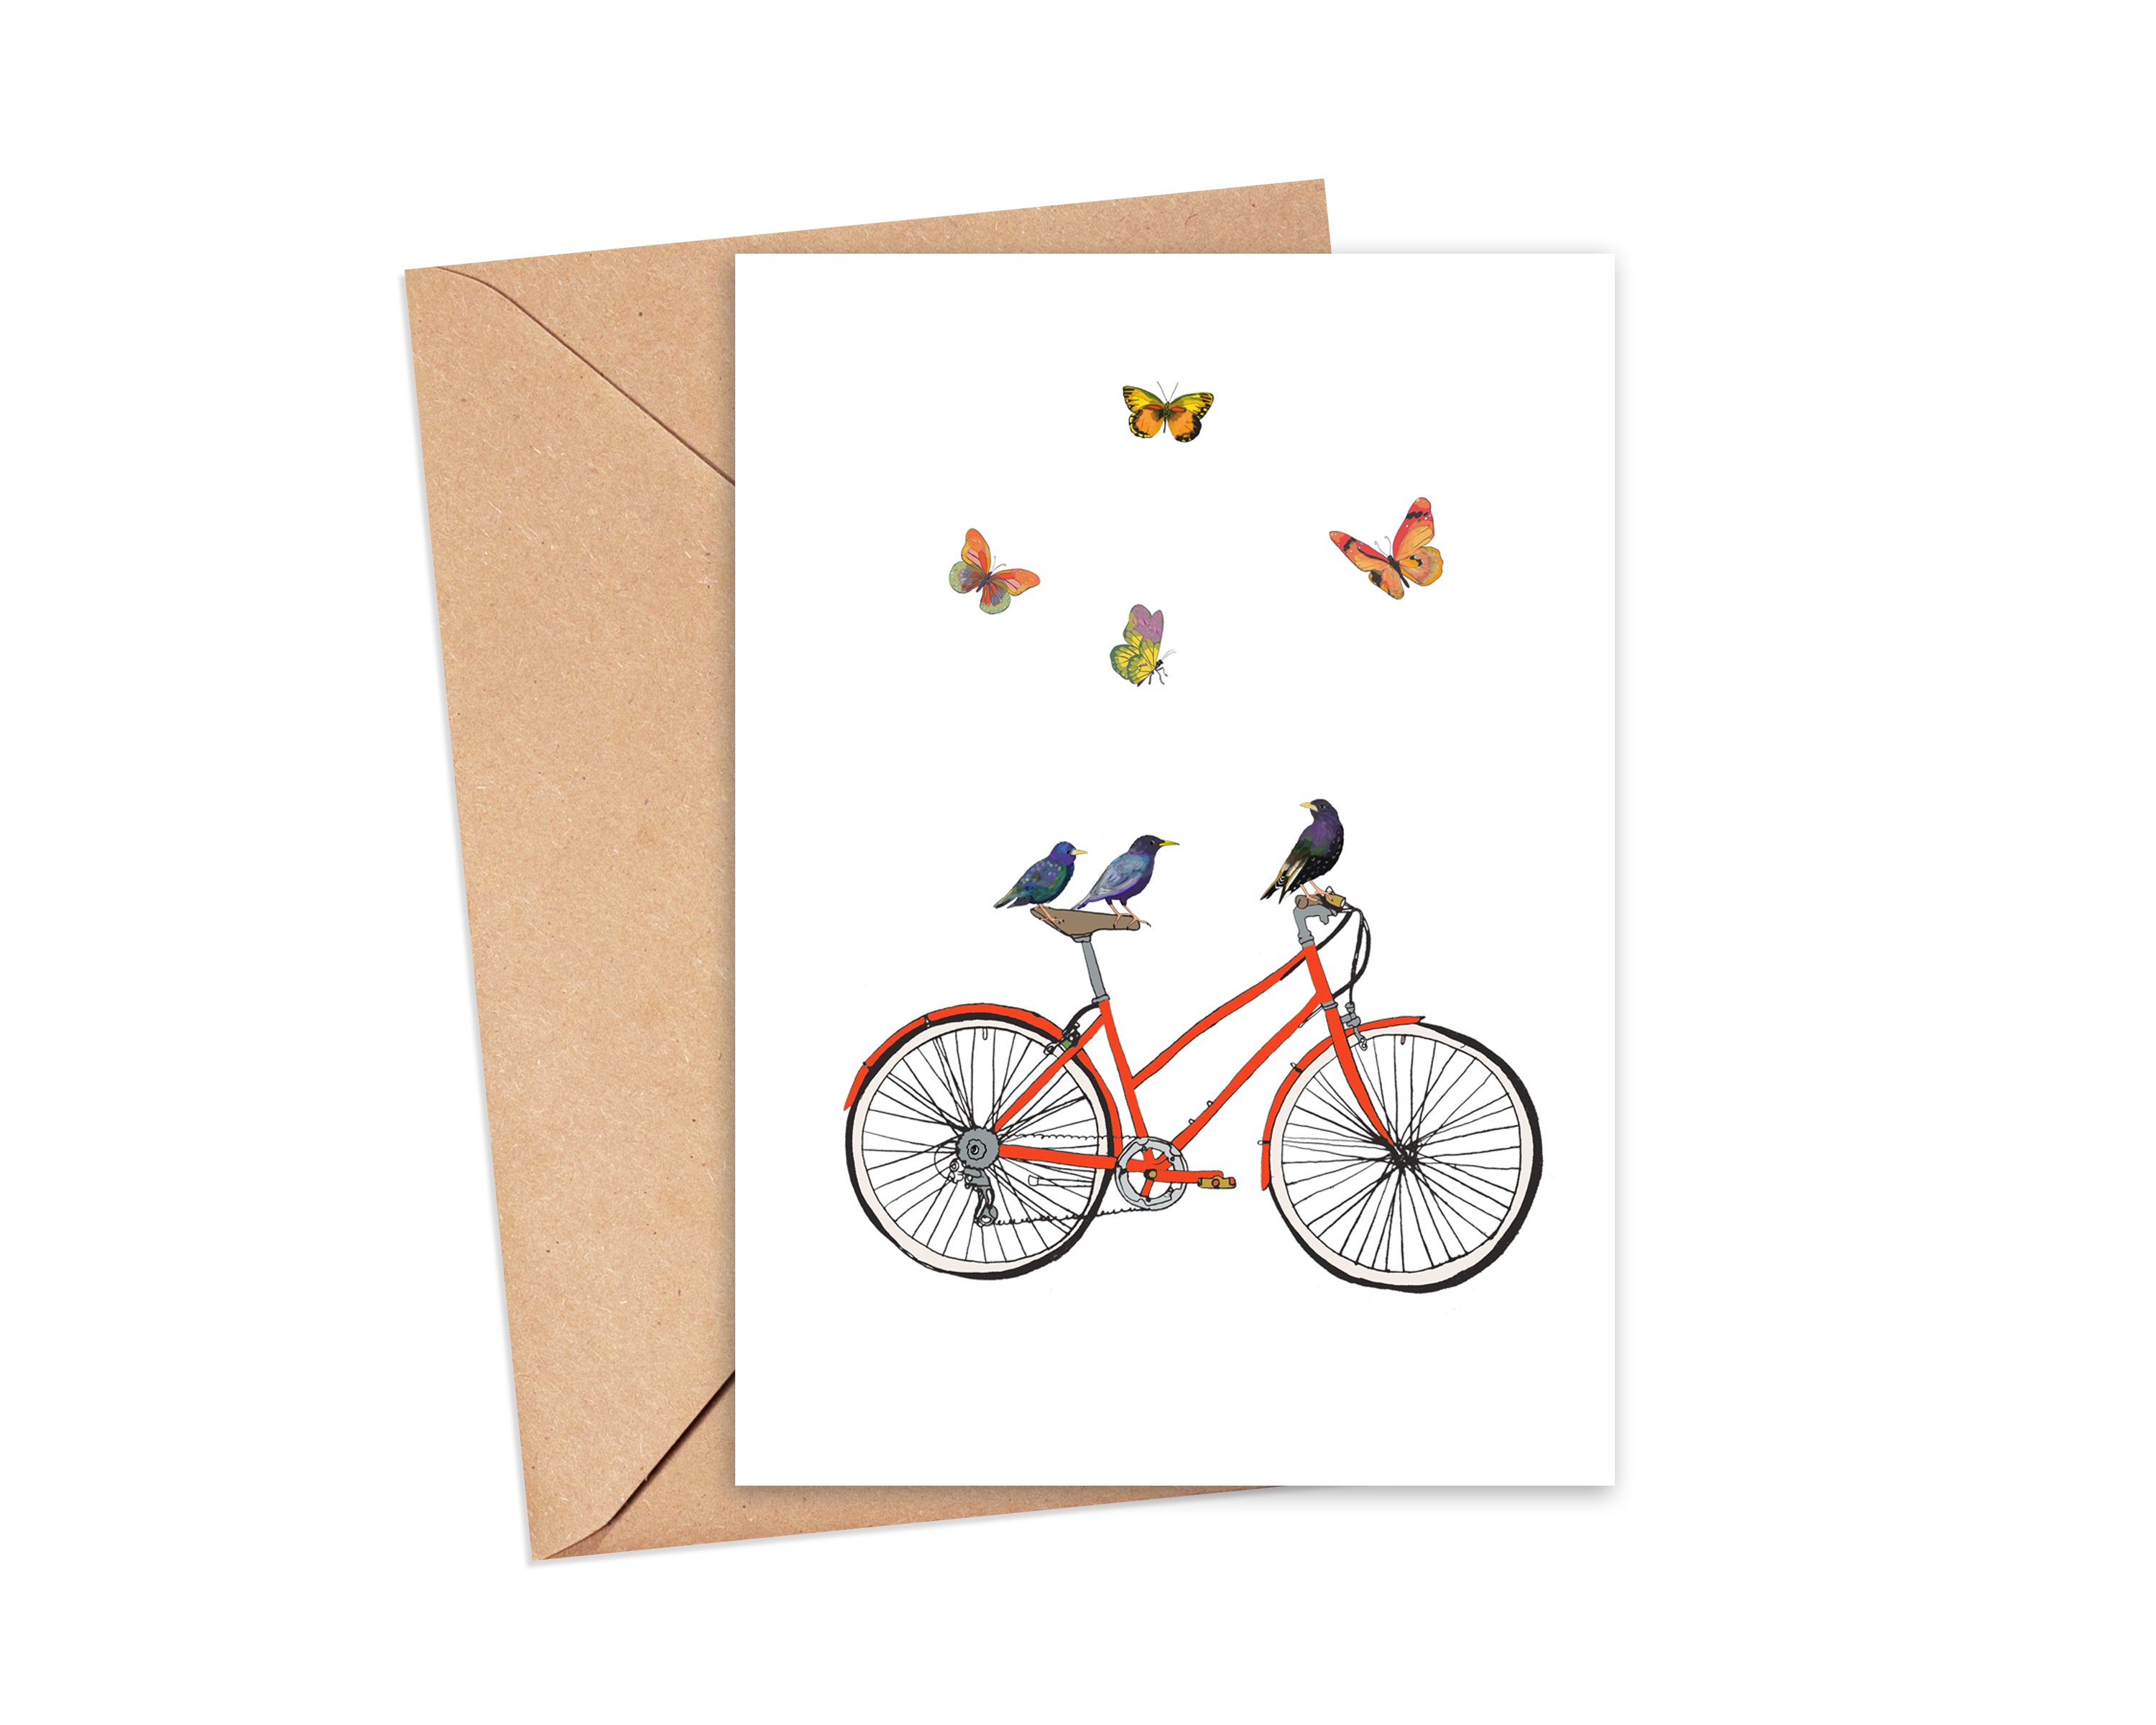 "You're my starling" Blank Card